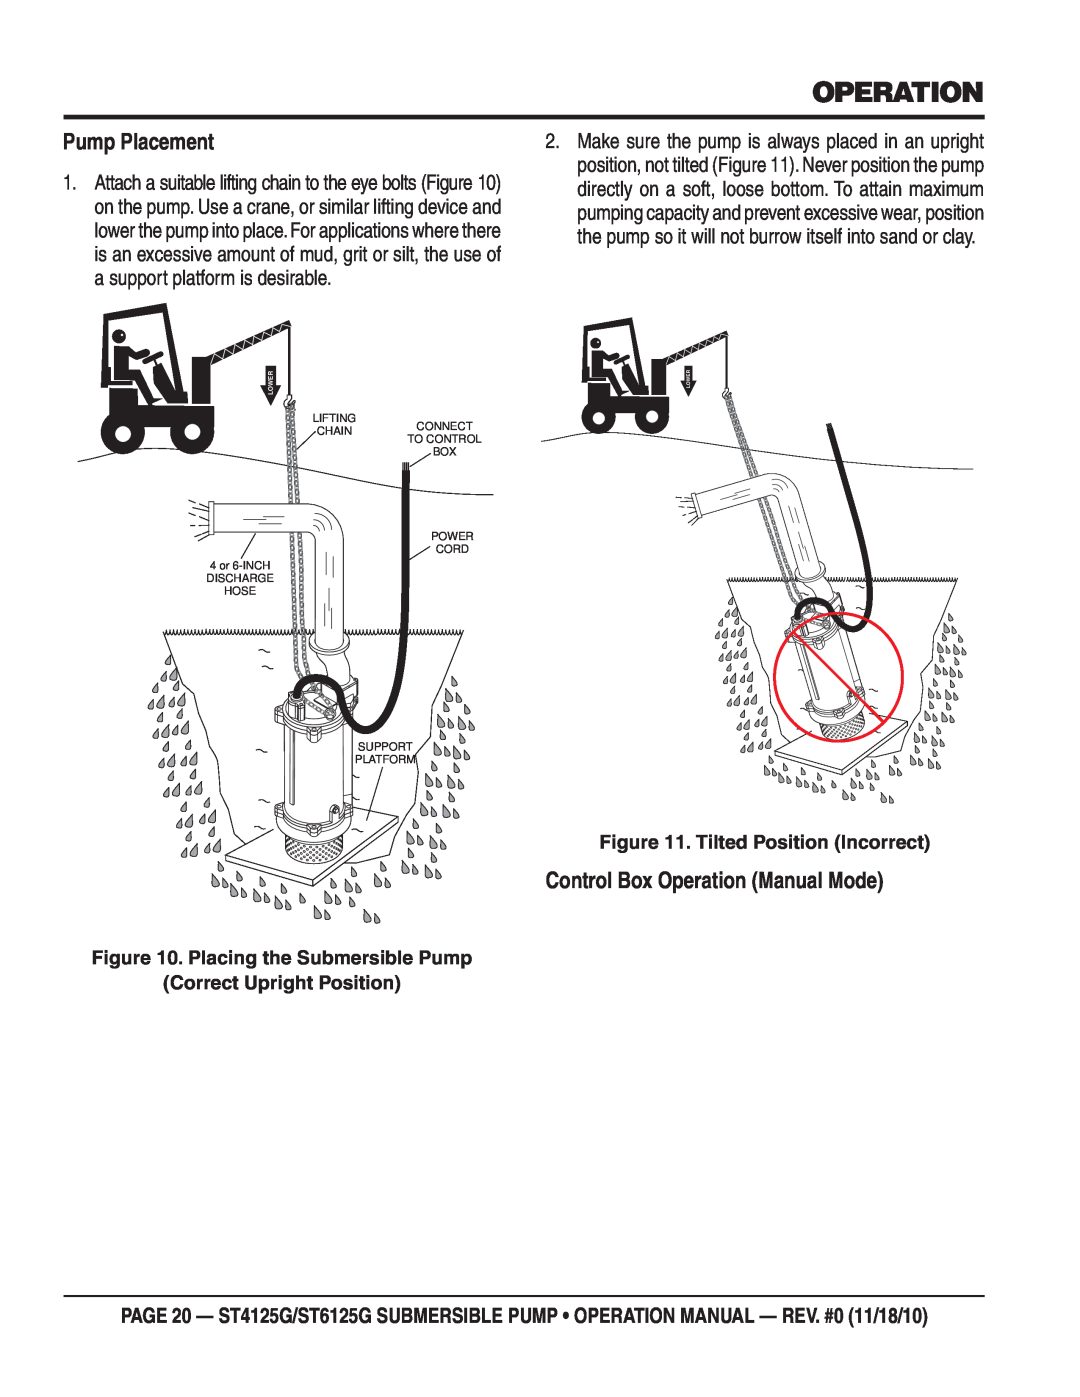 Multiquip ST6125G, ST4125G operation manual Pump Placement, Control Box Operation Manual Mode, Tilted Position Incorrect 